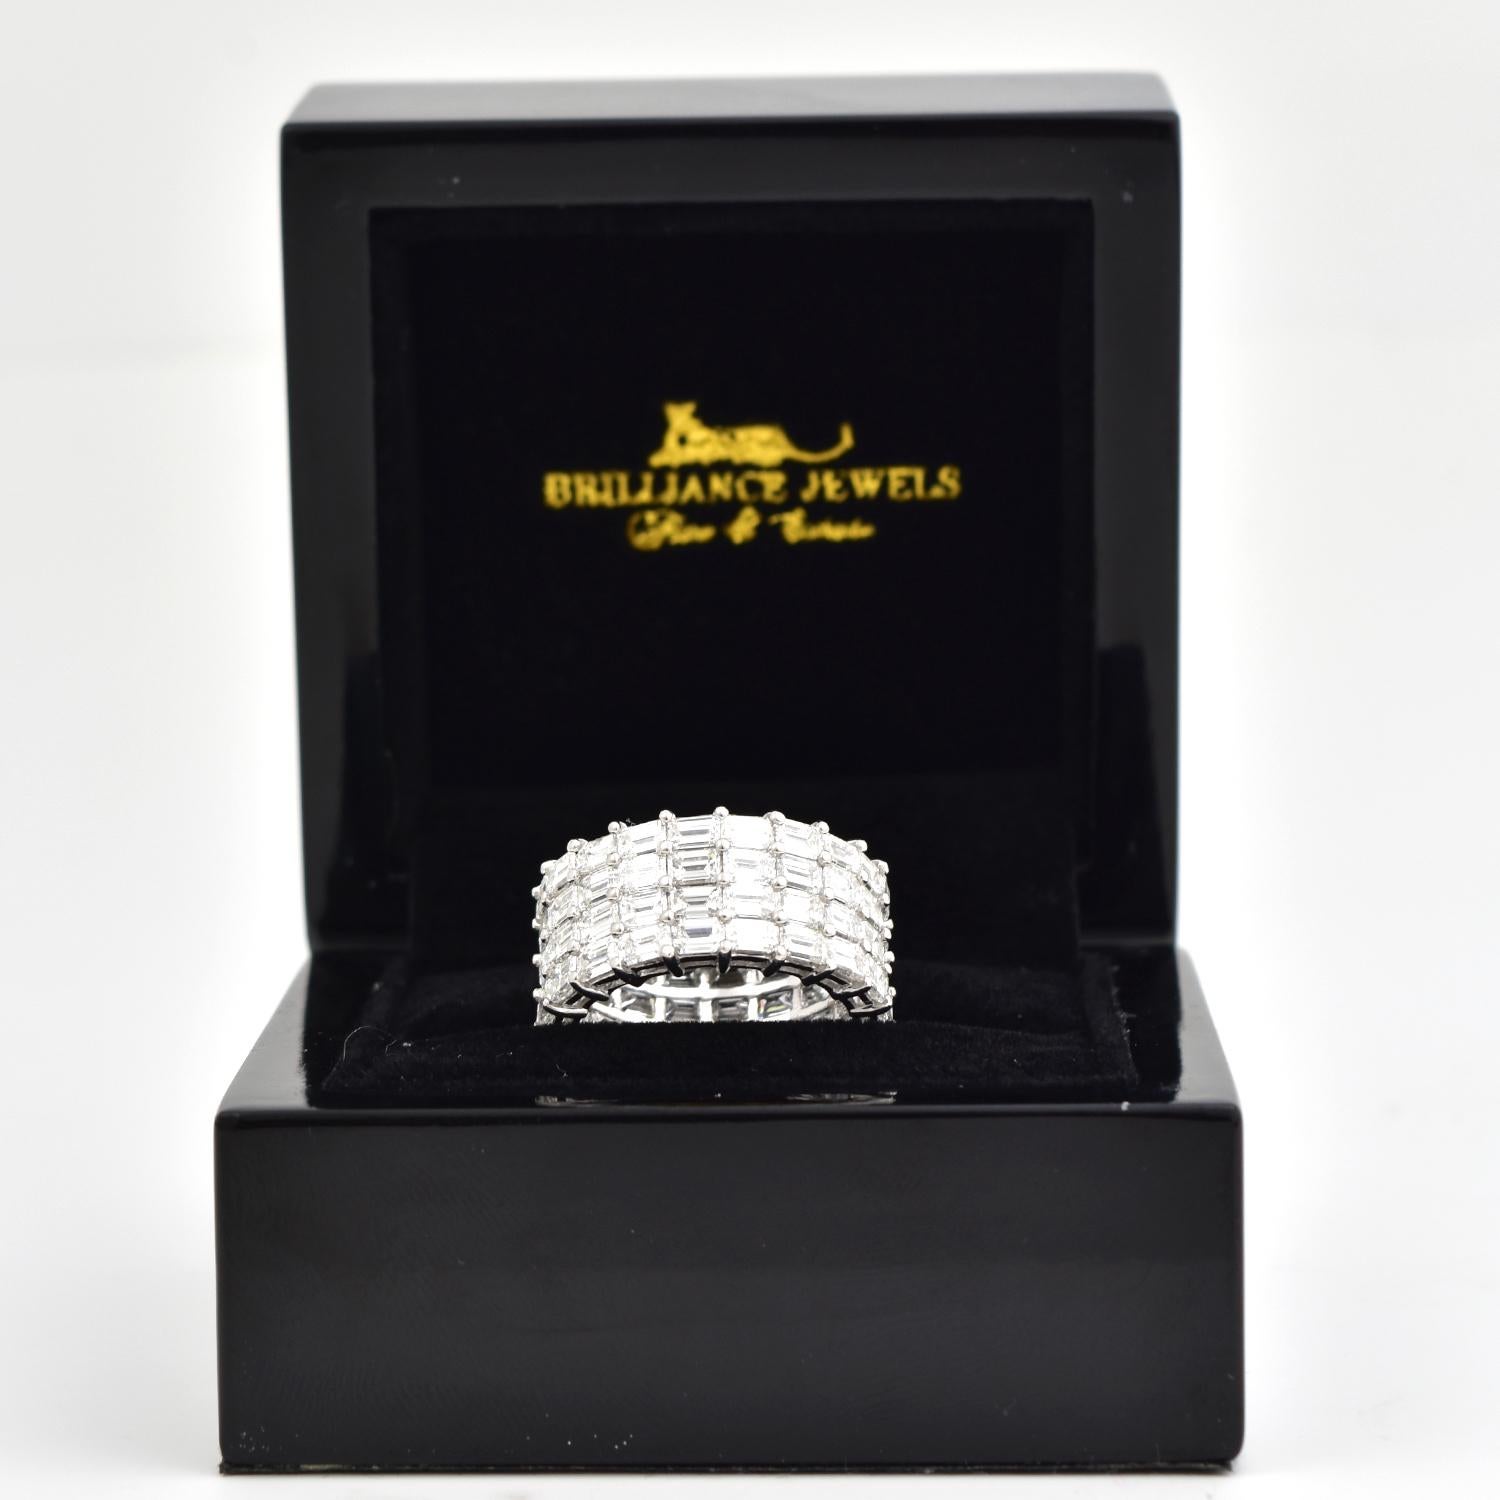 Style: Wide Eternity Band

Metal: White Gold 

Metal Purity: 18k

Stone: Baguette Cut 

Ring Size: 6

Total Carat Weight : Approx. 10 ct 

Diamond Color: E-F

Diamond Clarity: VS1​​​​​​​

Includes: 24 Month Brilliance Jewels Warranty 

Brilliance